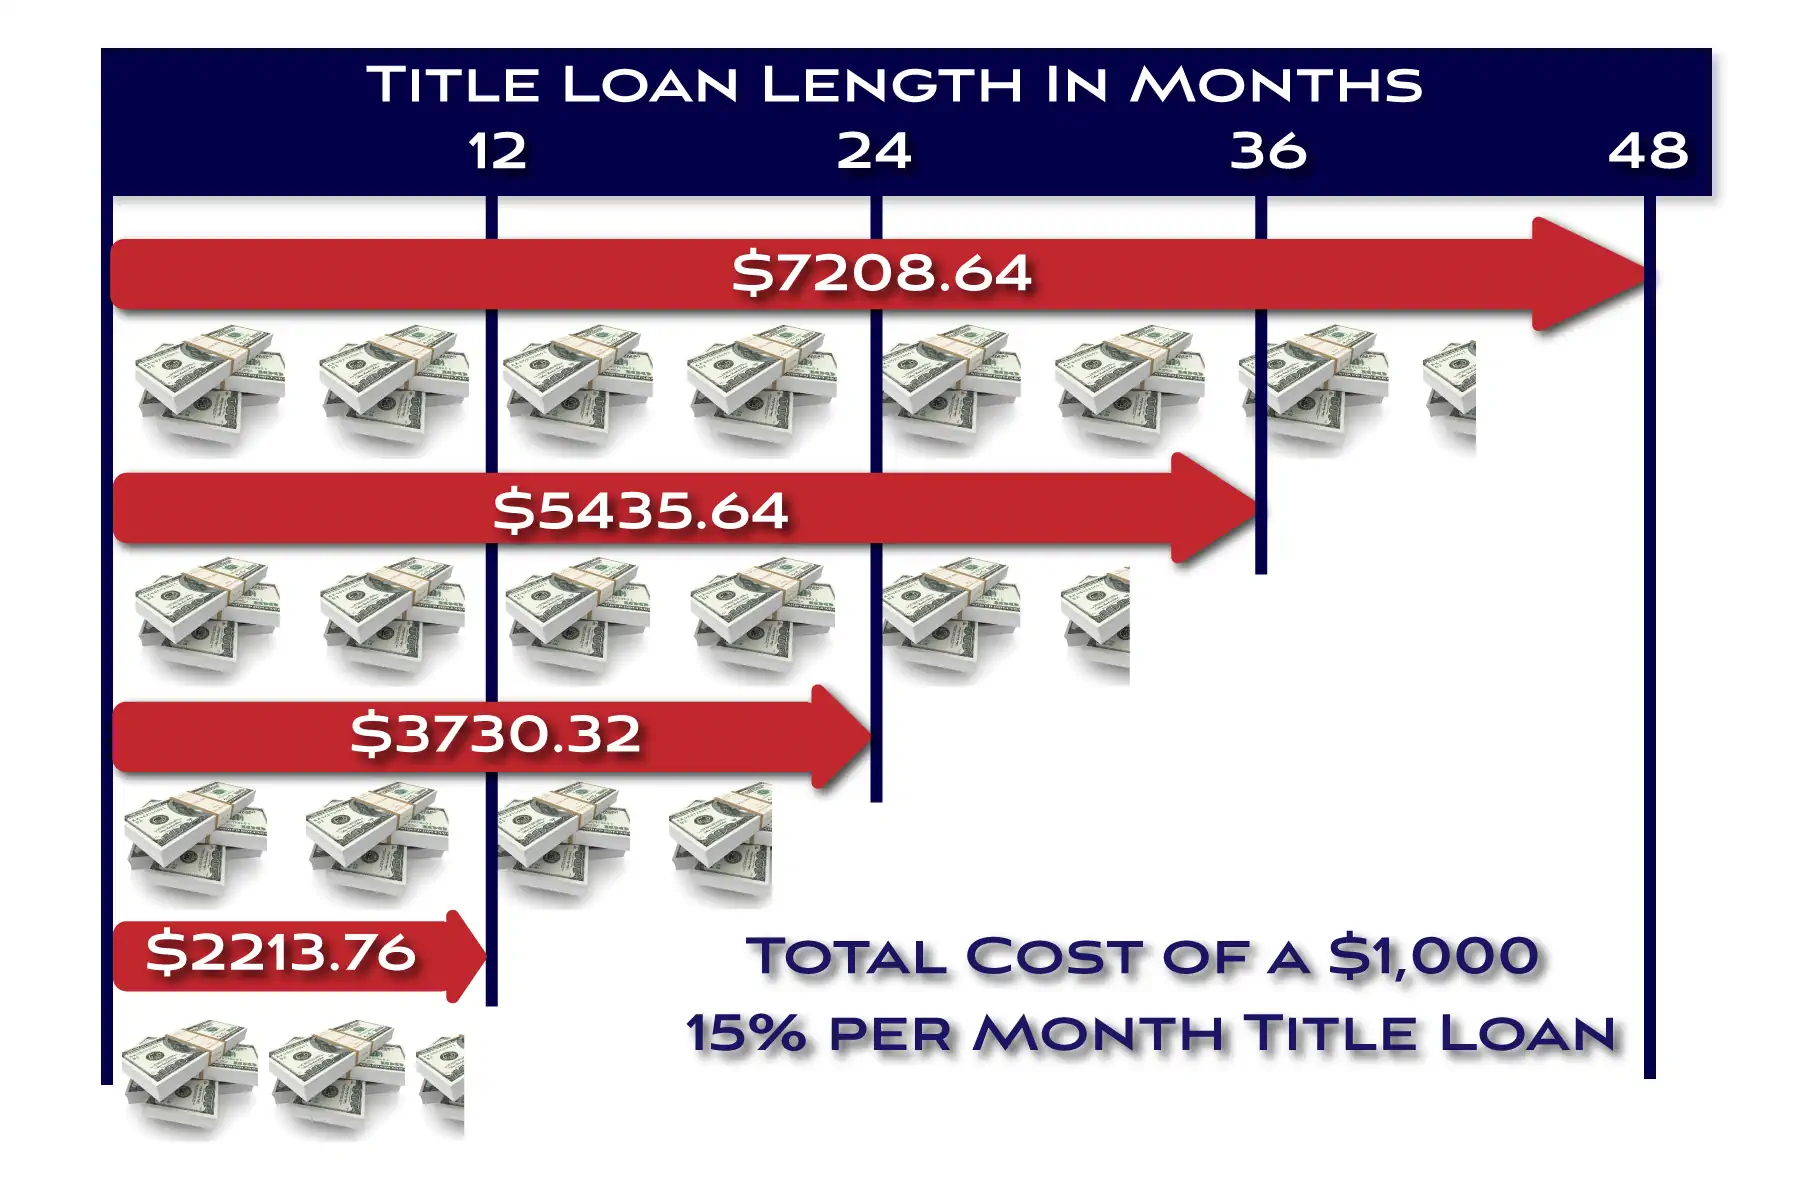 A $1,000 Title loan at 15% per month graphed based on length: 12 month = $2213.76, 24 month = $3730.32, 36 month = $5435.64, and 48 month = $7208.64